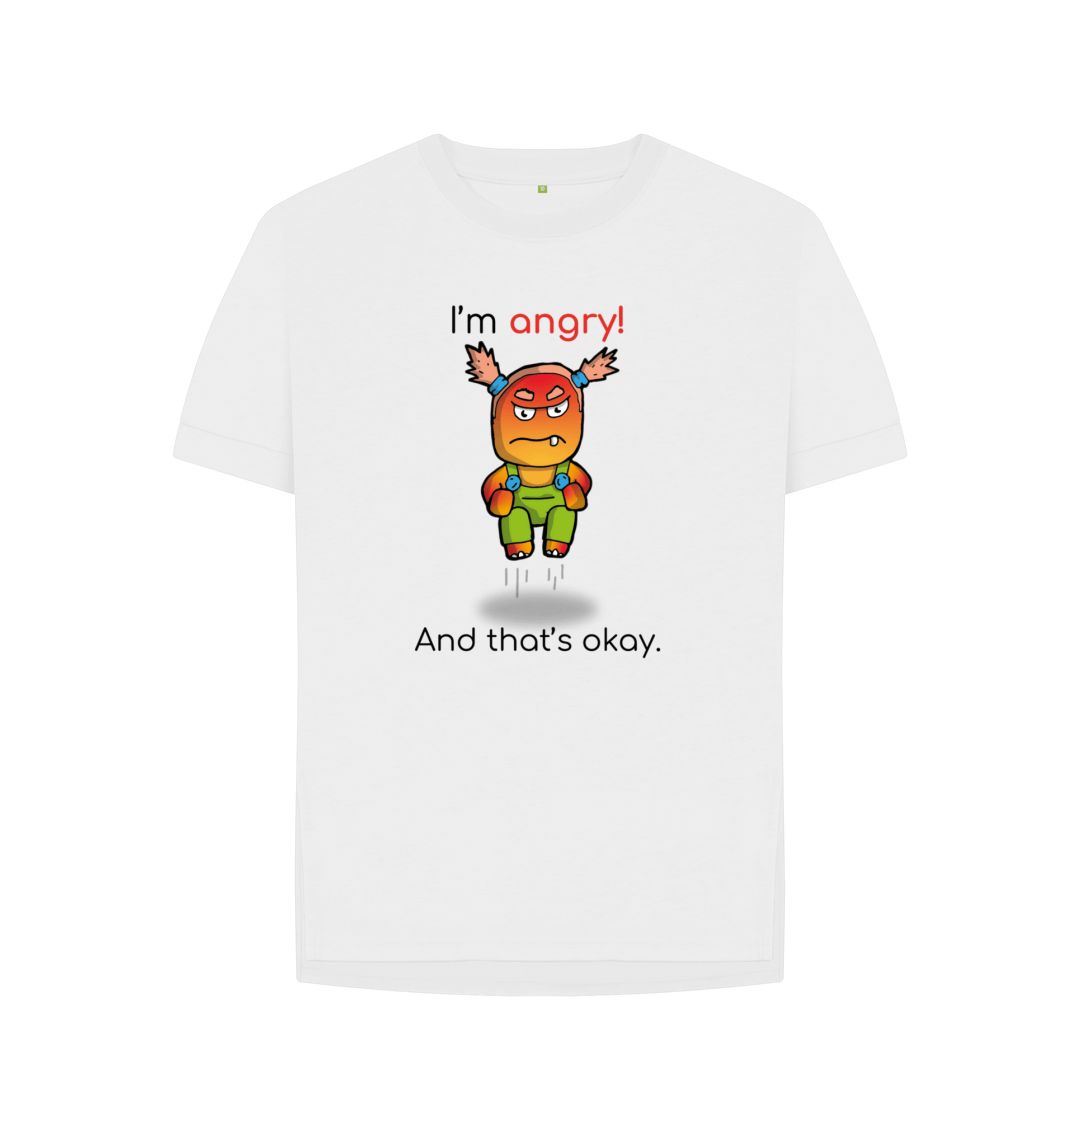 White Angry Emotion Woman's Relaxed Organic Mental Health T-Shirt